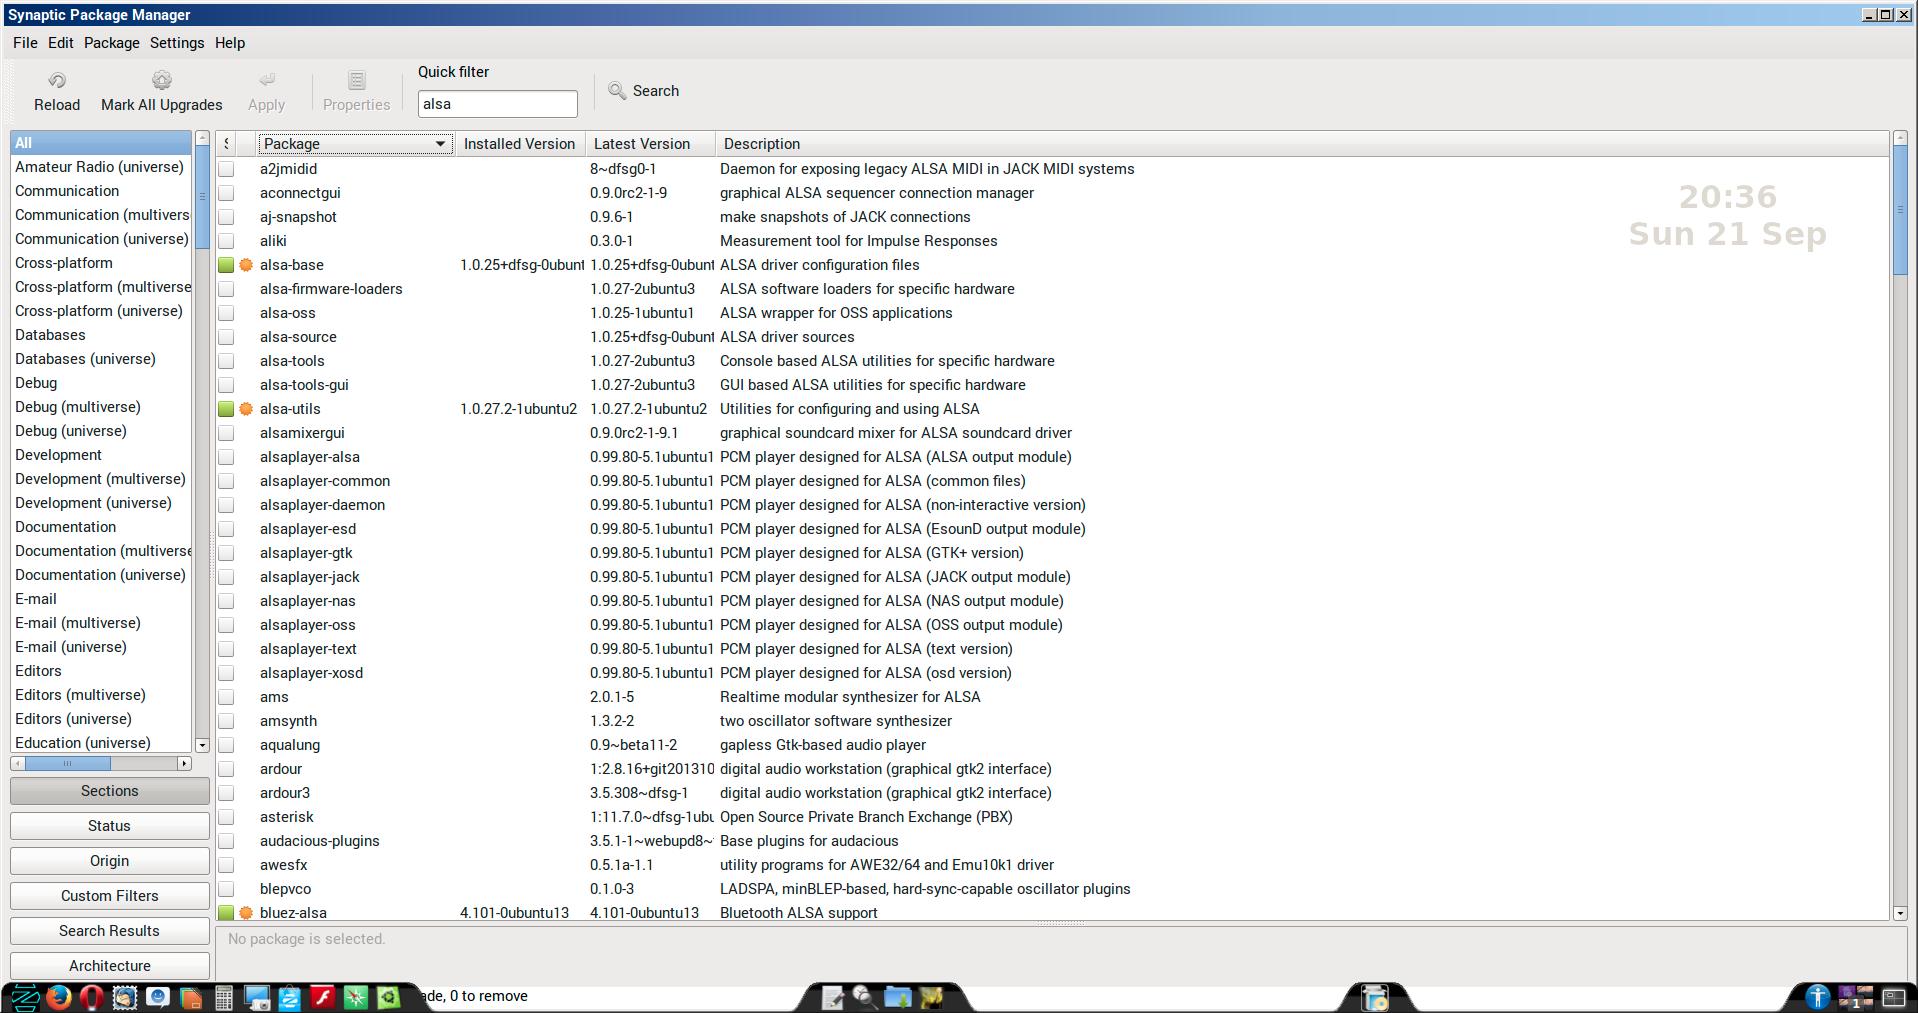 Synaptic Package Manager _014.jpg